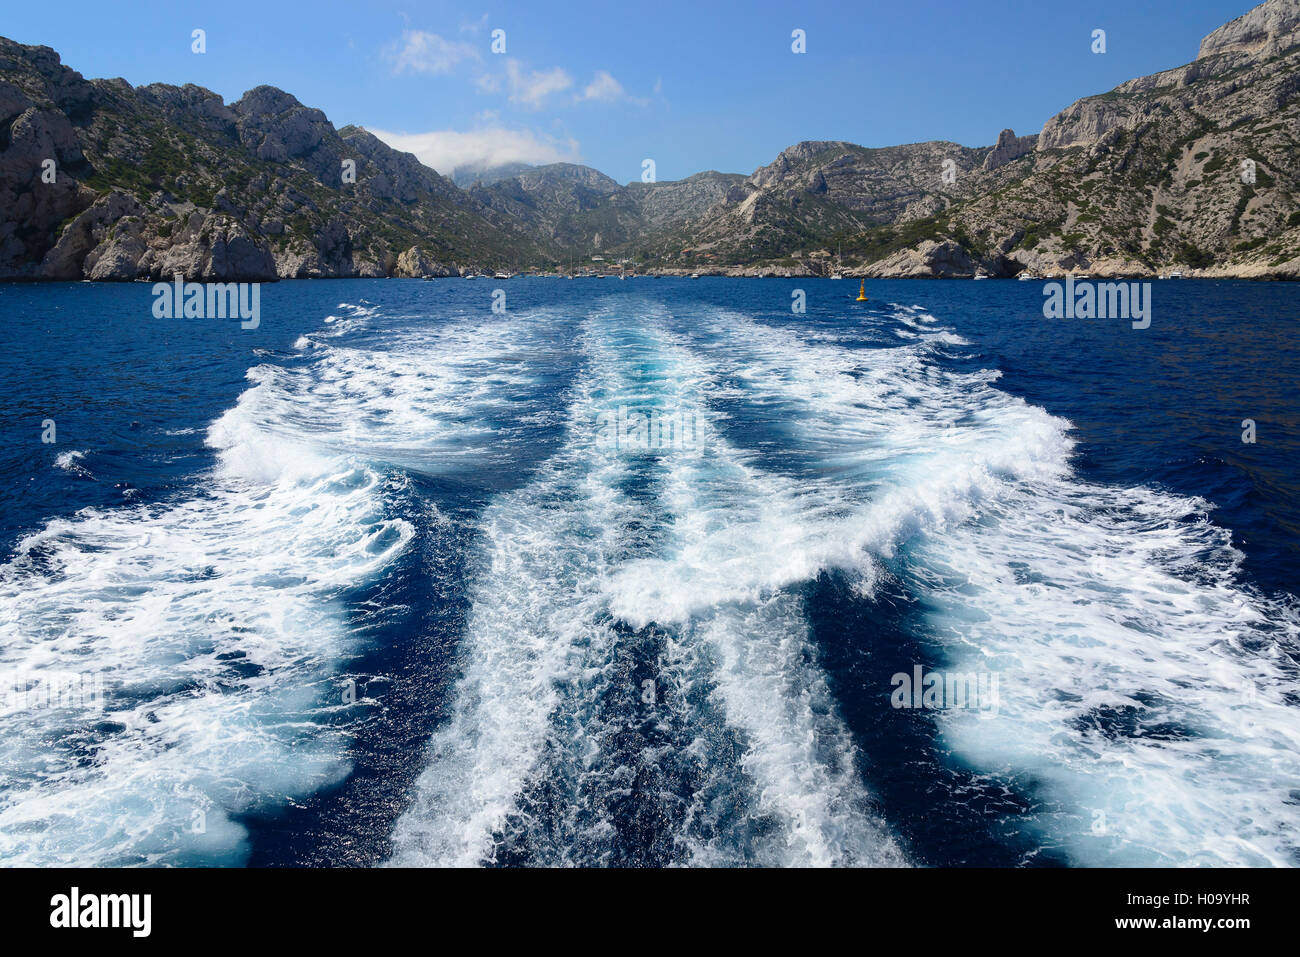 Wake behind a boat, Mediterranean, Calanques National Park, Marseille, Provence, Cote d'Azur, France Stock Photo